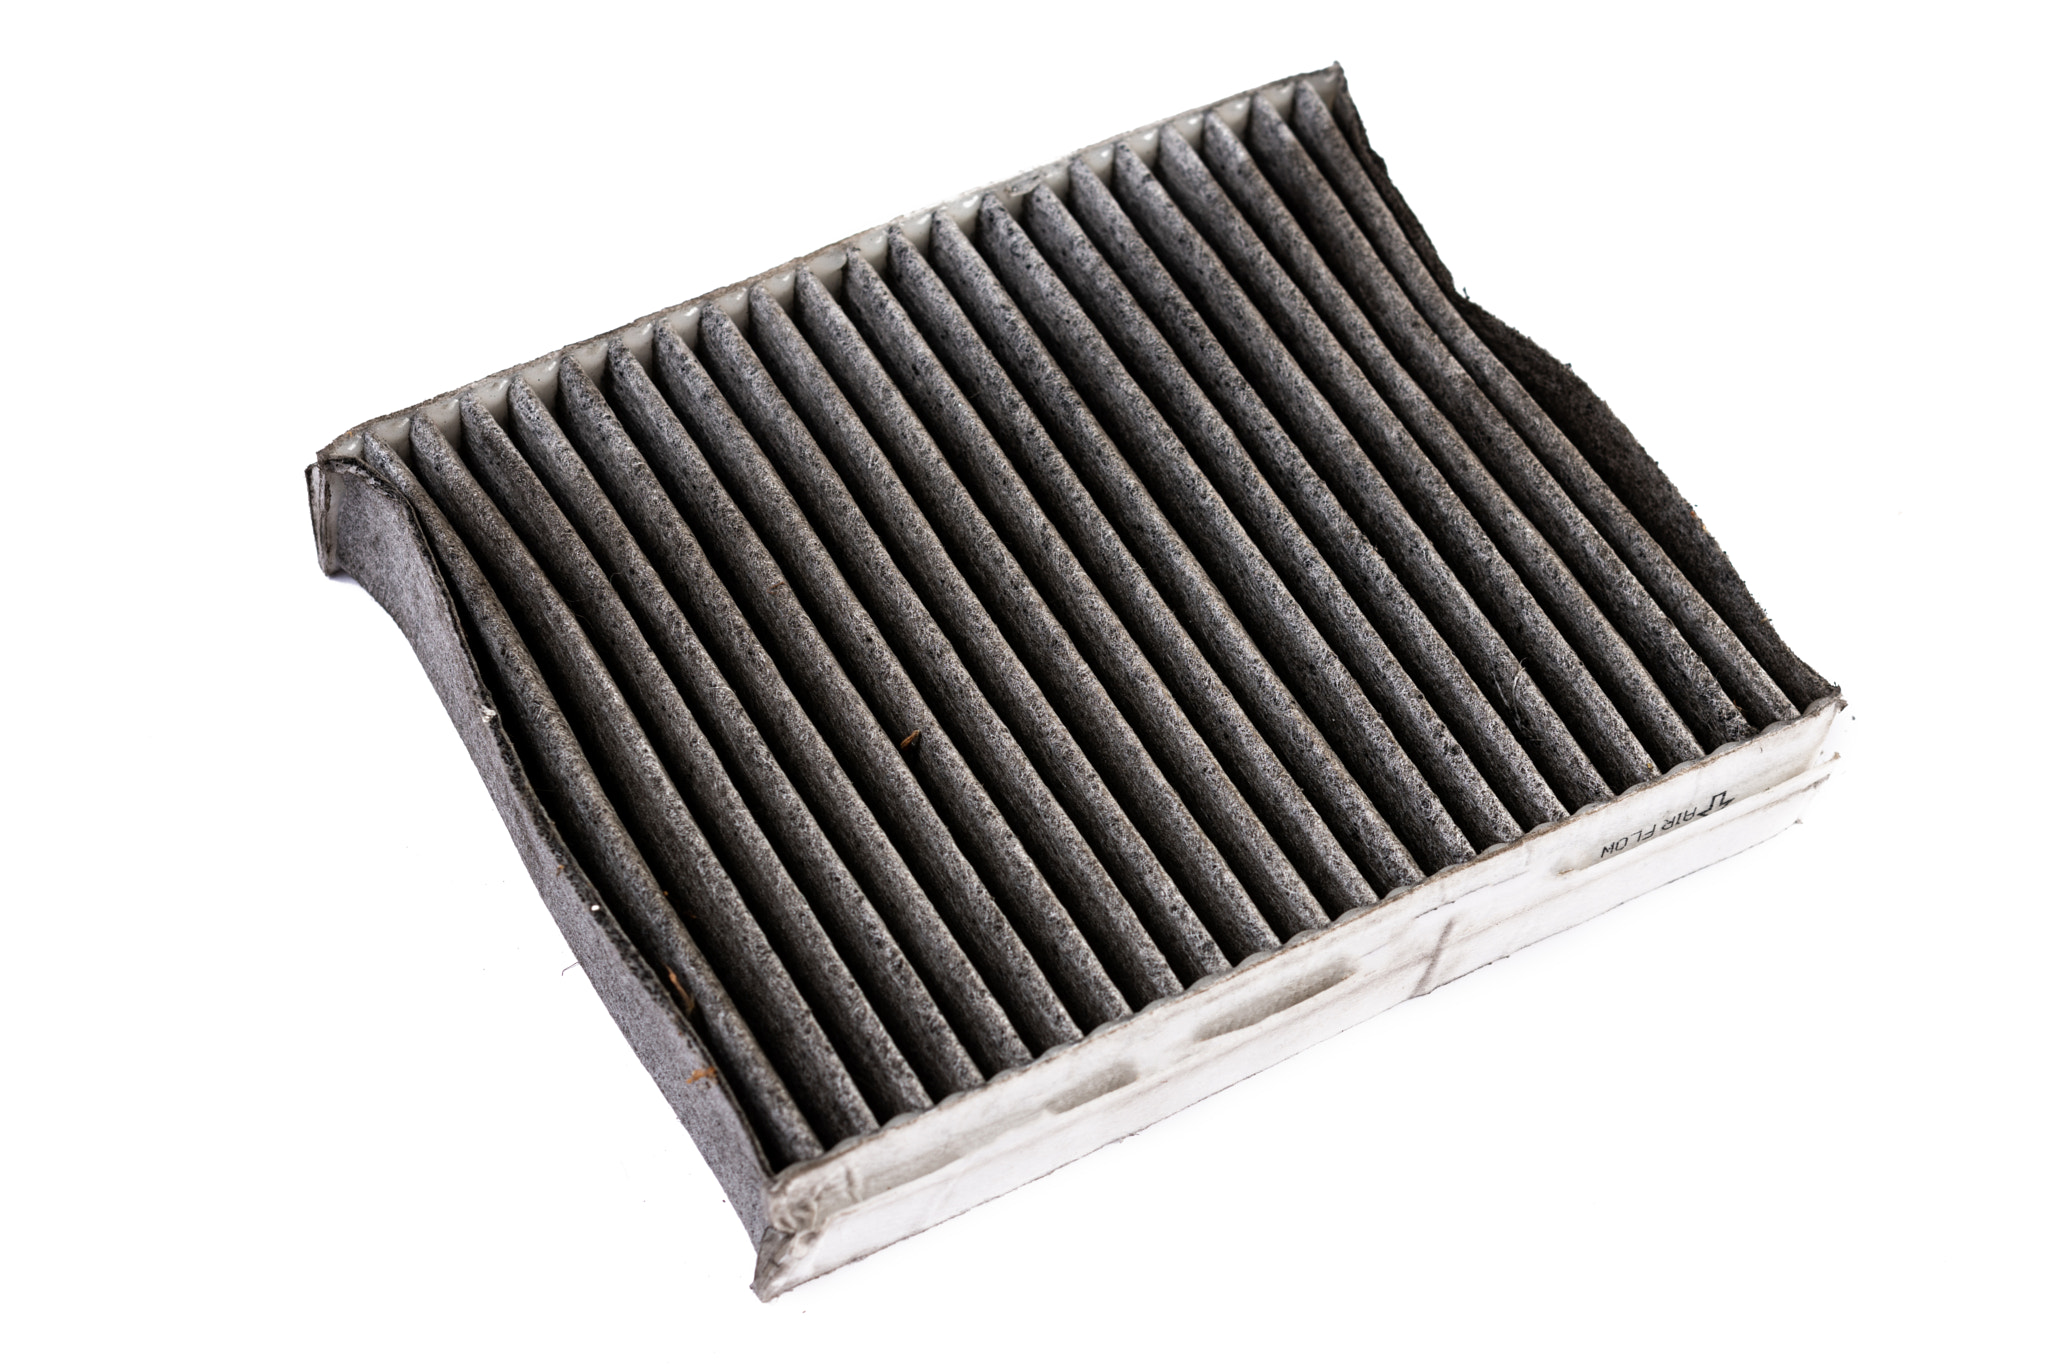 Dirty used car air conditioner filter isolated above white background.